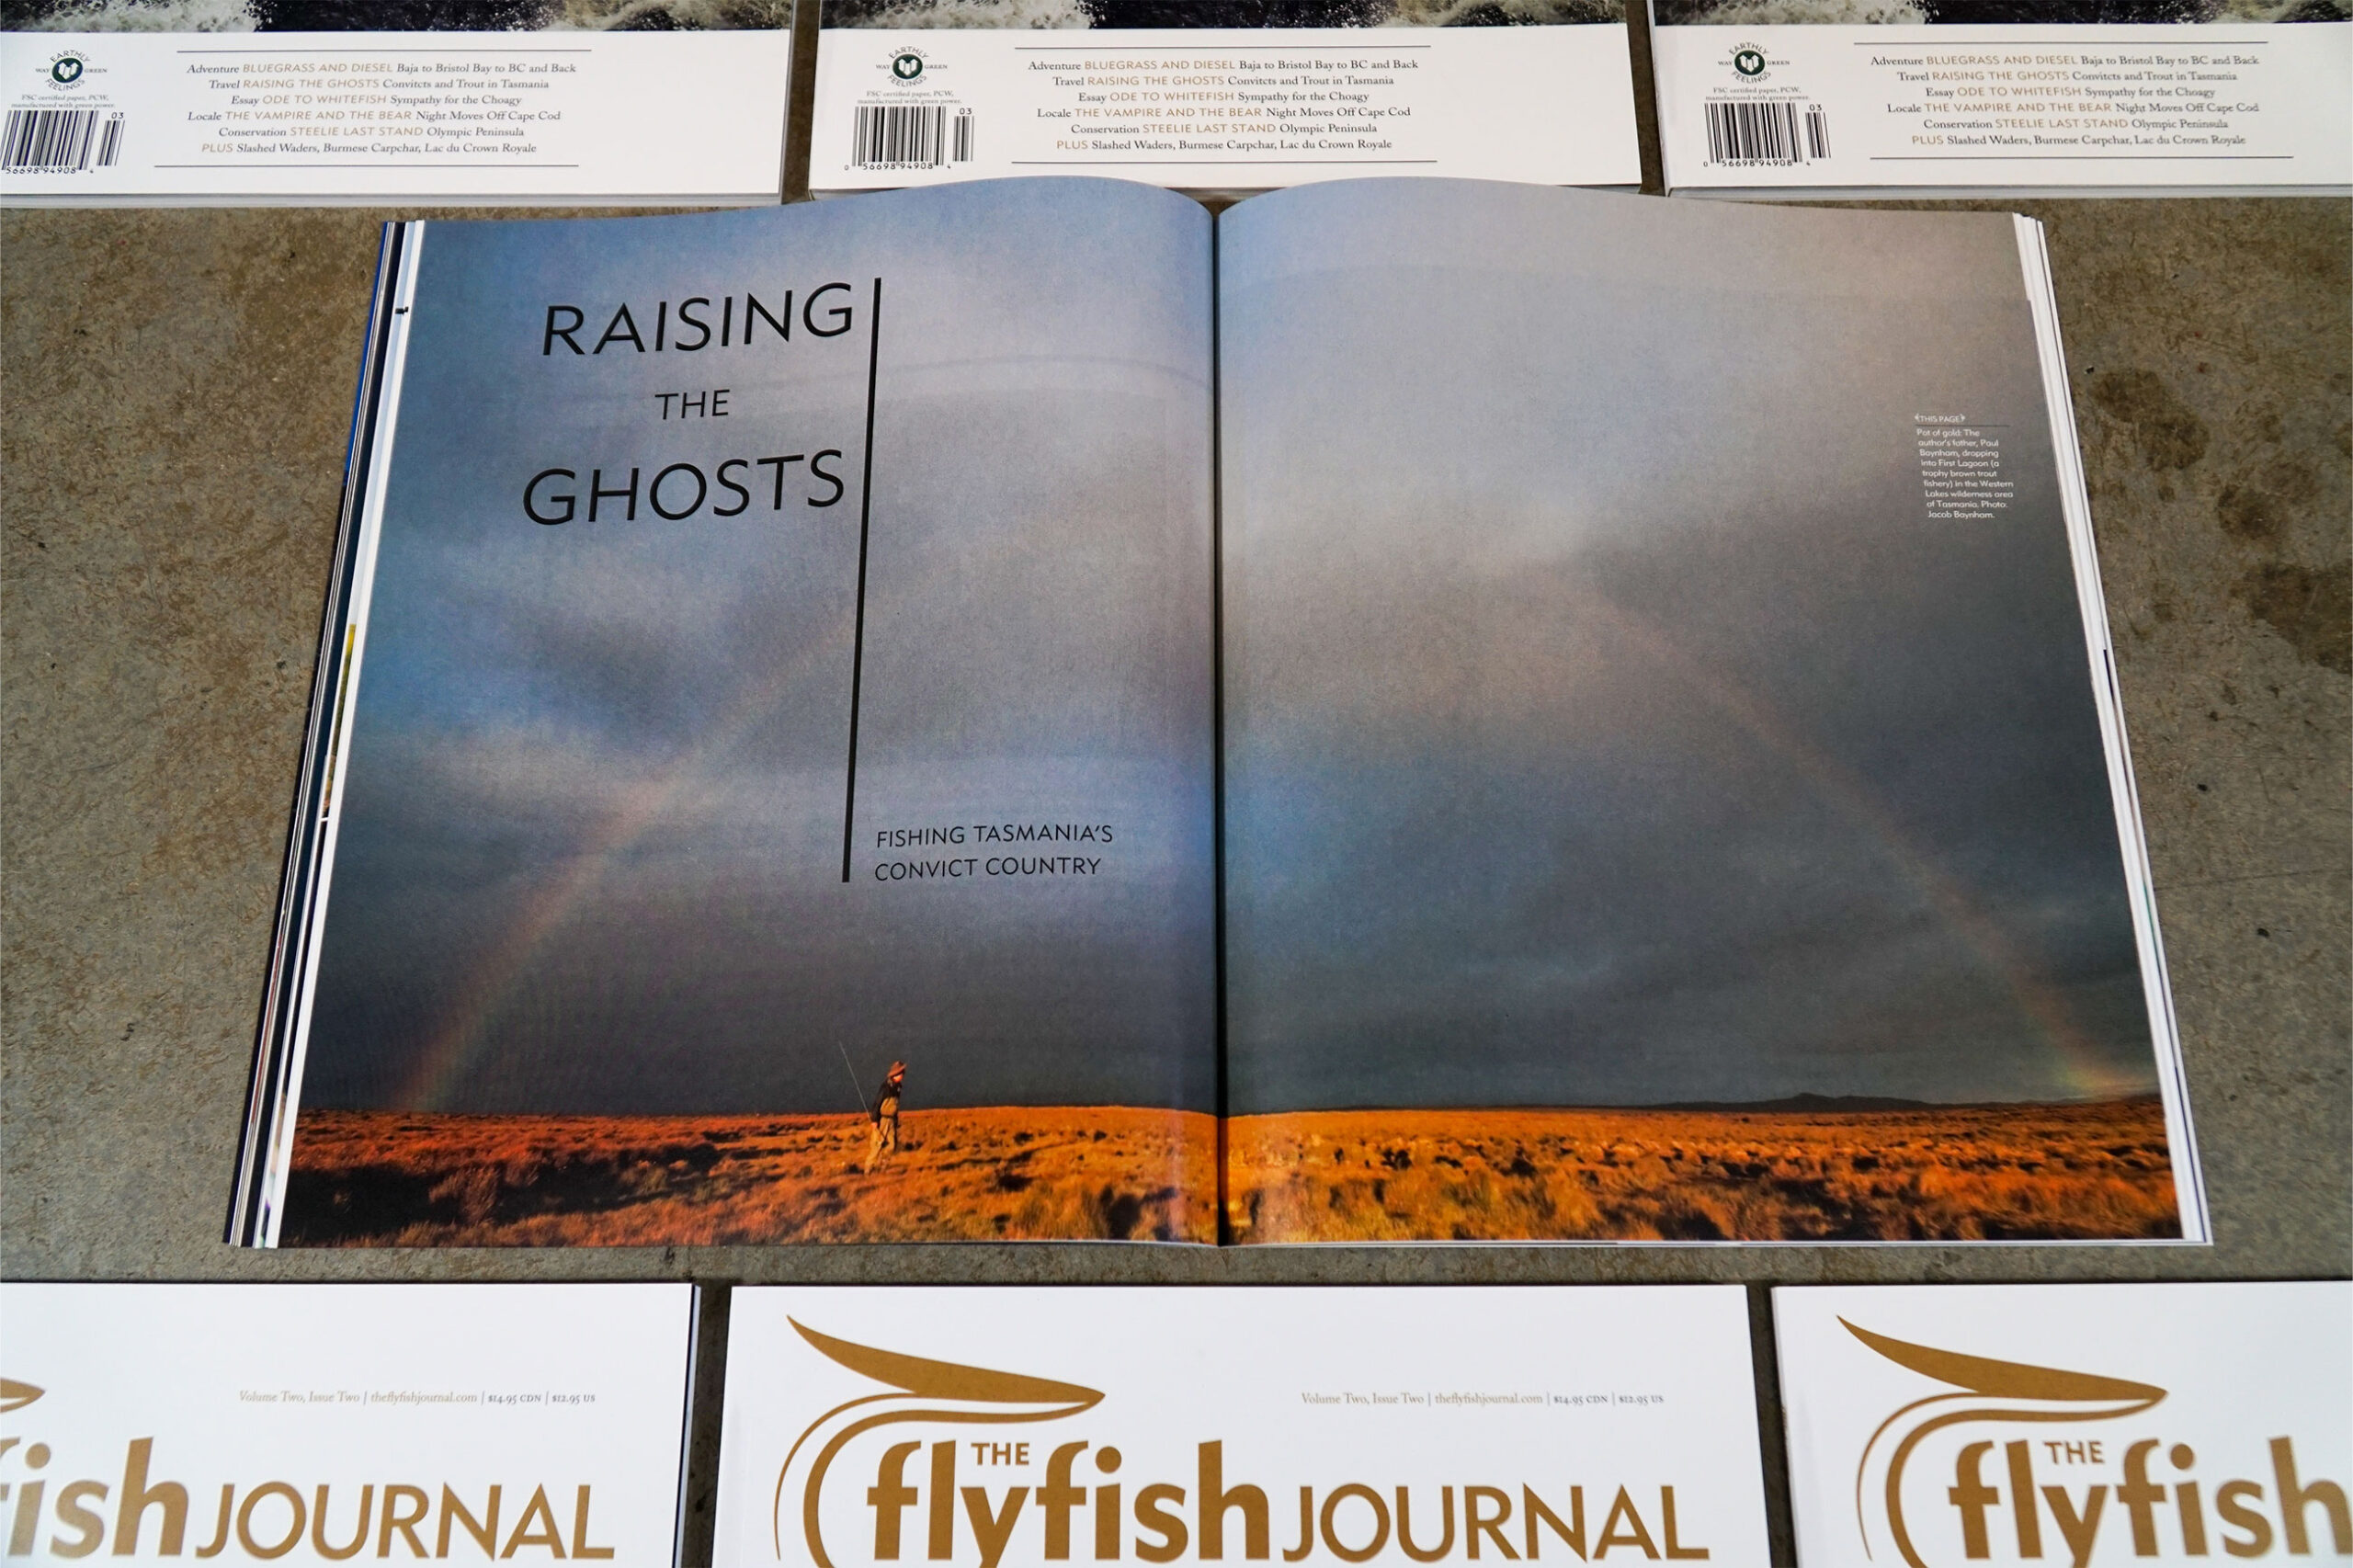 The Flyfish Journal Volume 2 Issue 2 Feature Riasing the Ghosts